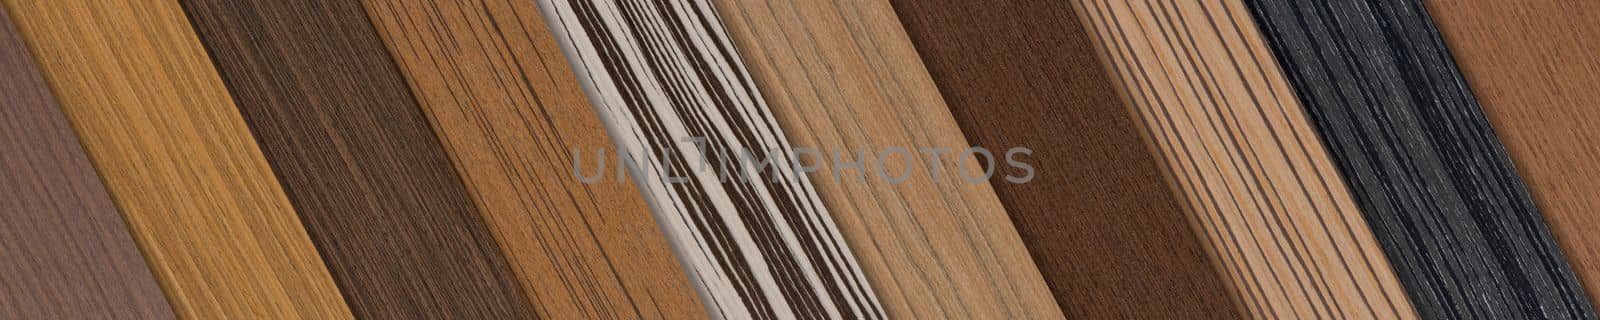 Samples of wood of different species. Pieces of wood veneer in different shades and textures. Samples of wood for the production of floor furniture or doors top view. by SERSOL